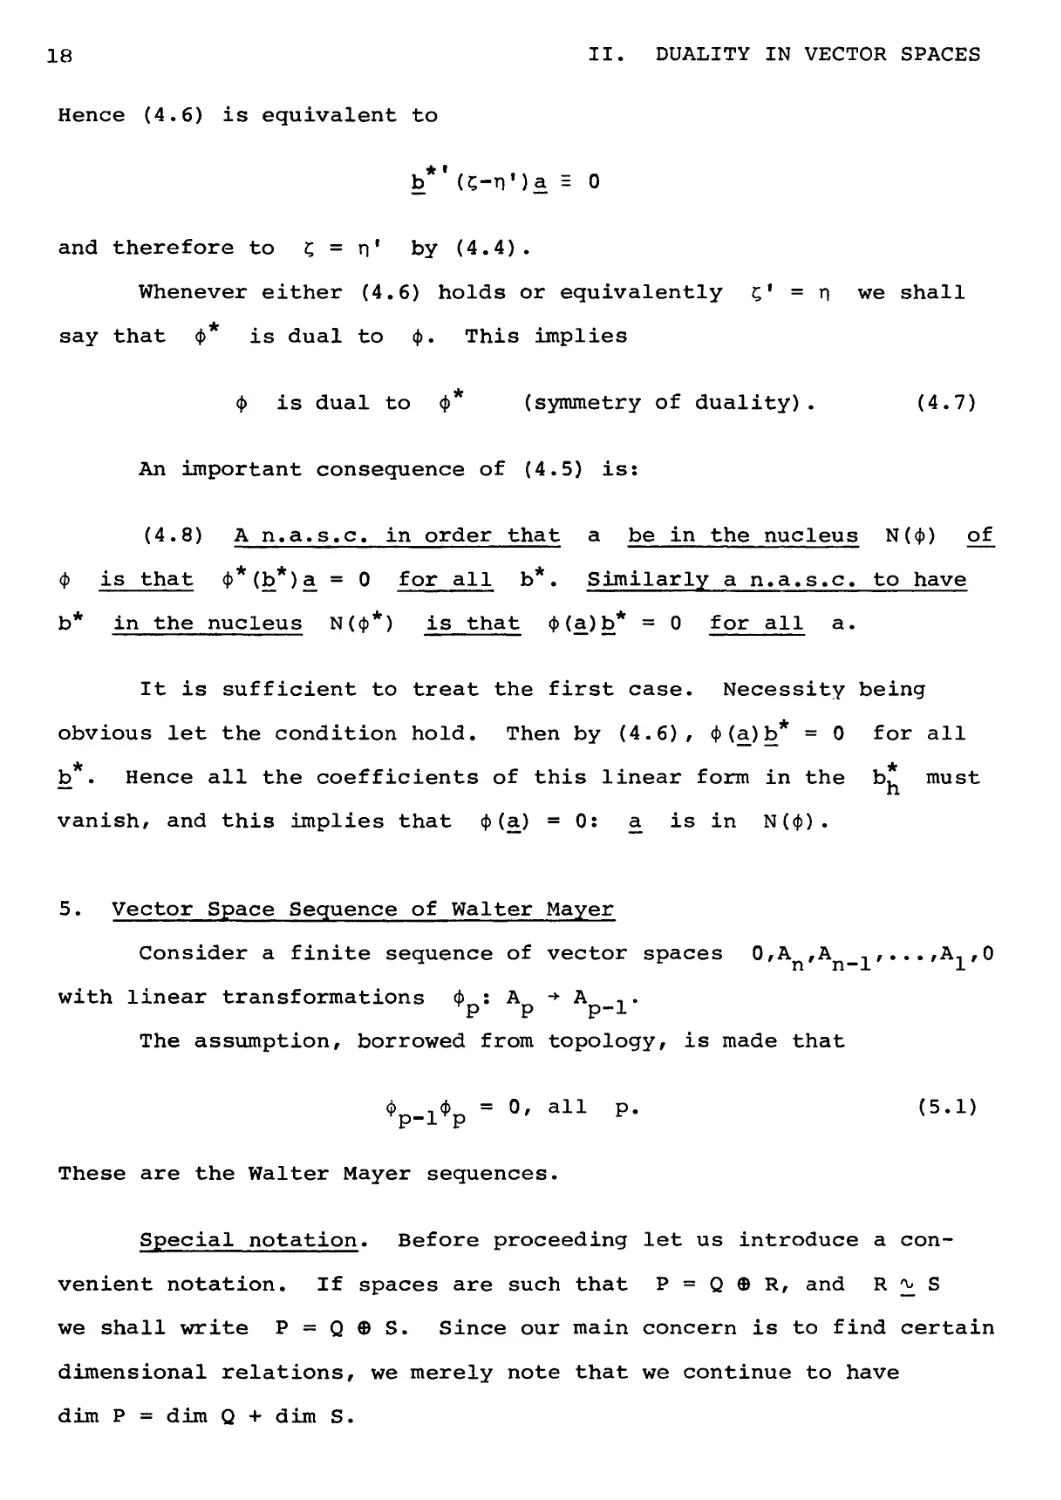 5. Vector Space Sequence of Walter Mayer